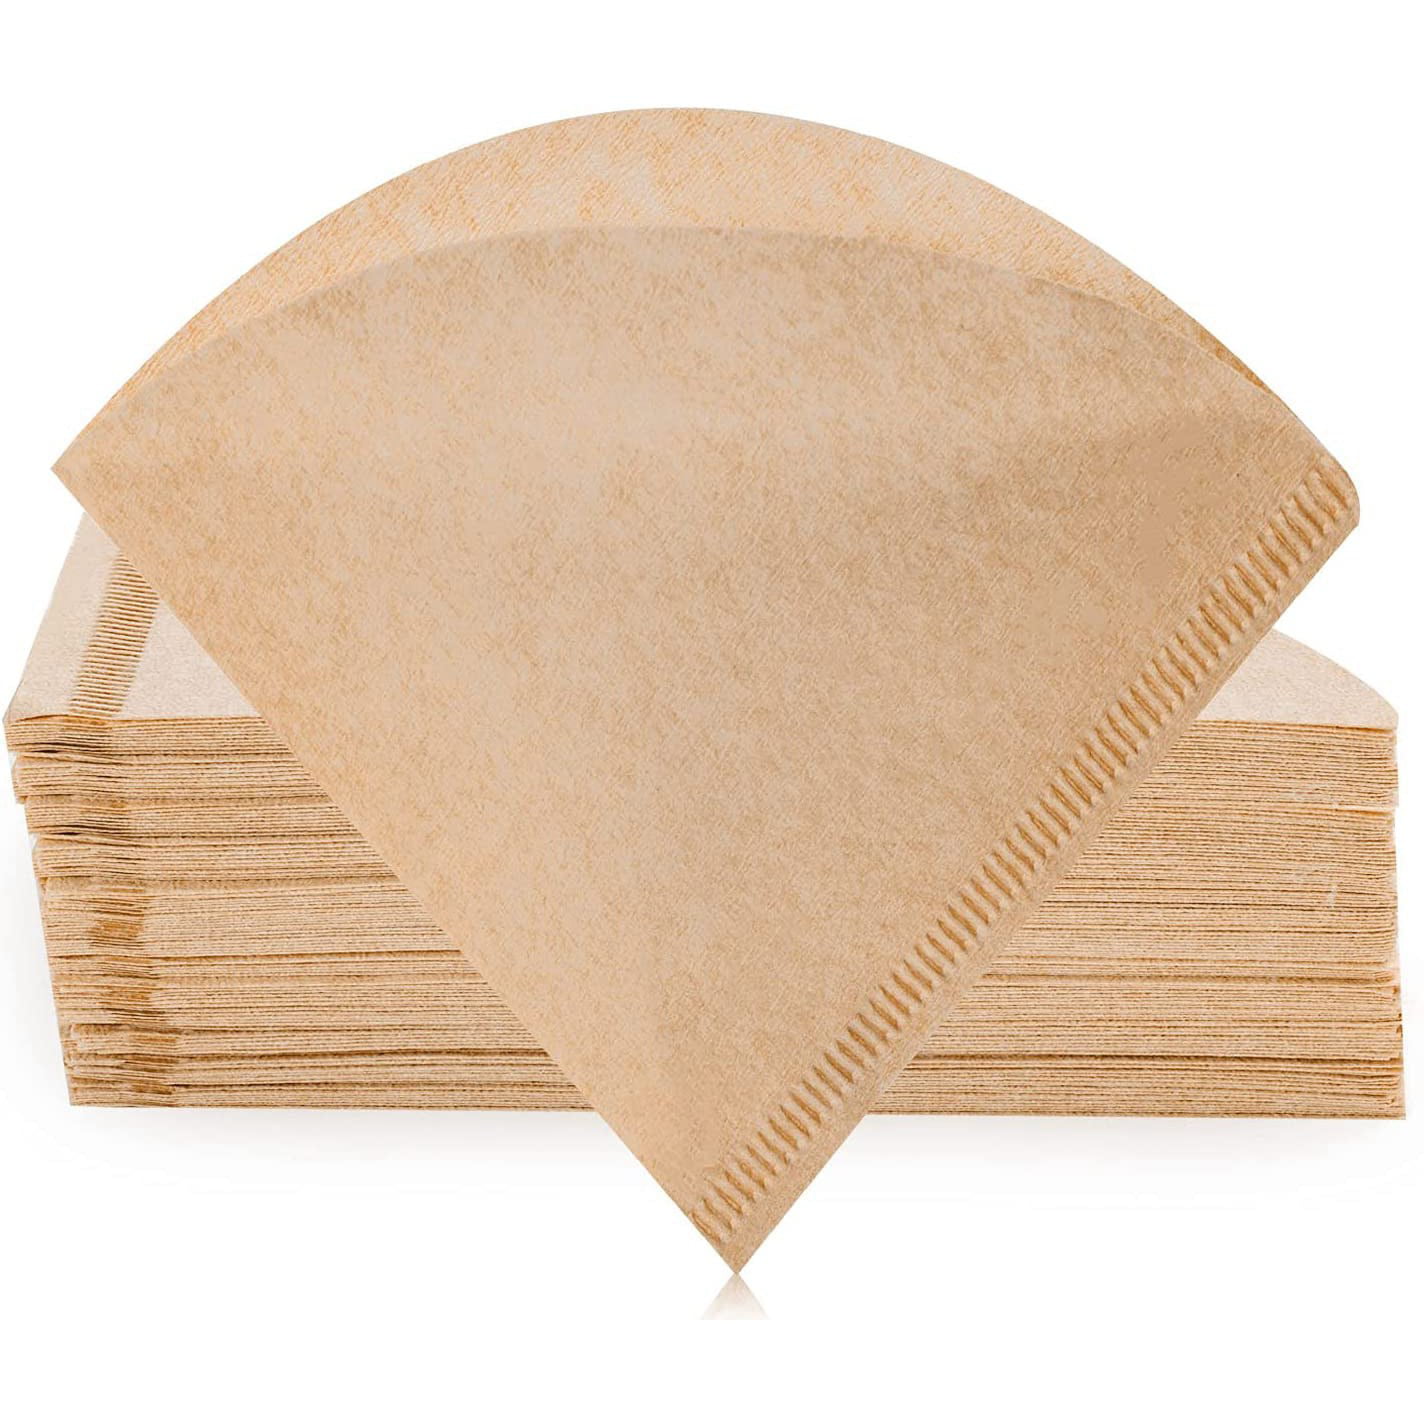 100x Unbleached Natural Brown Coffee Filters #4 for 2-4 Cup Coffee Maker